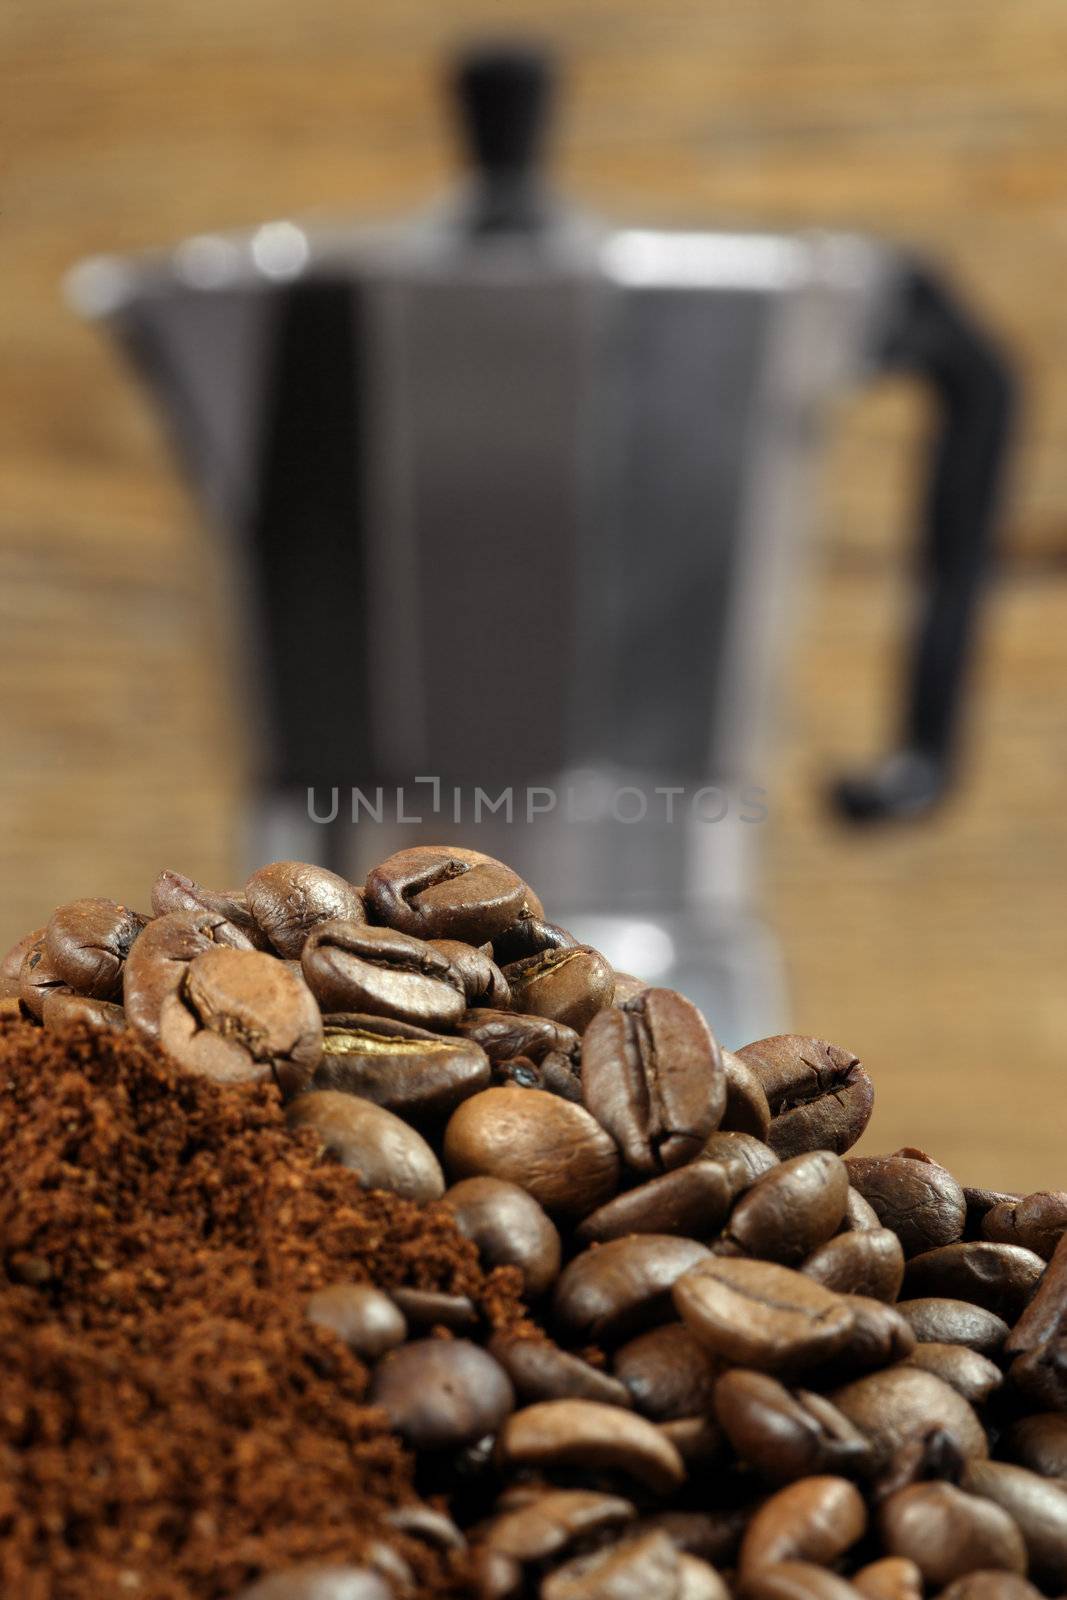 Image of an Italian Moka Express stovetop coffee maker behind coffee beans and grinds.  Shallow depth of field - focus is on top layer of beans.
